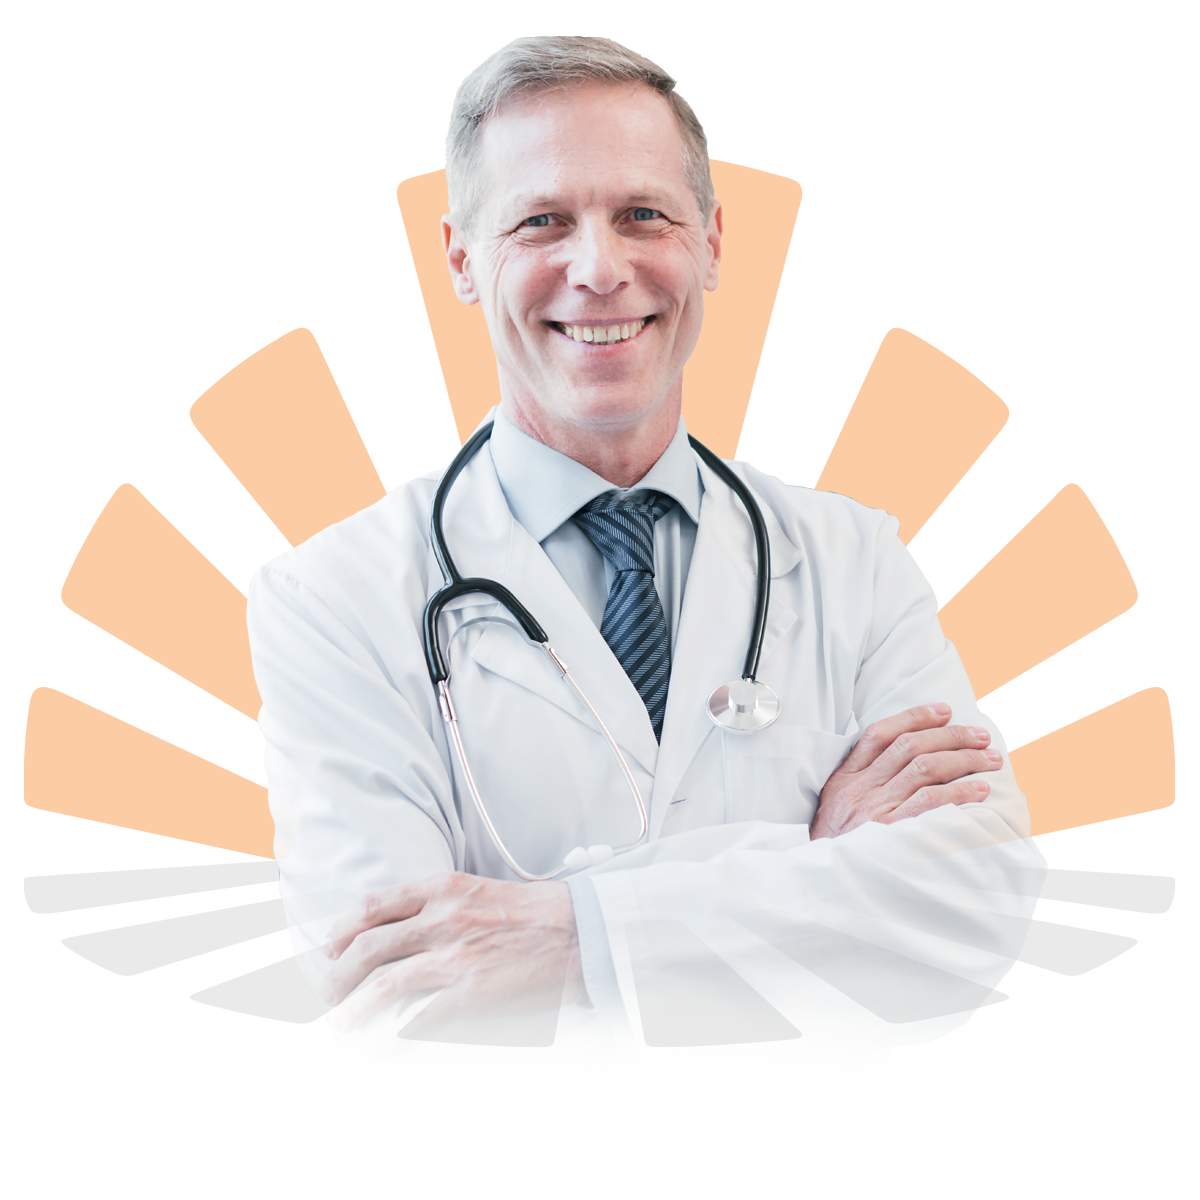 Male Doctor Smiling with arms crossed